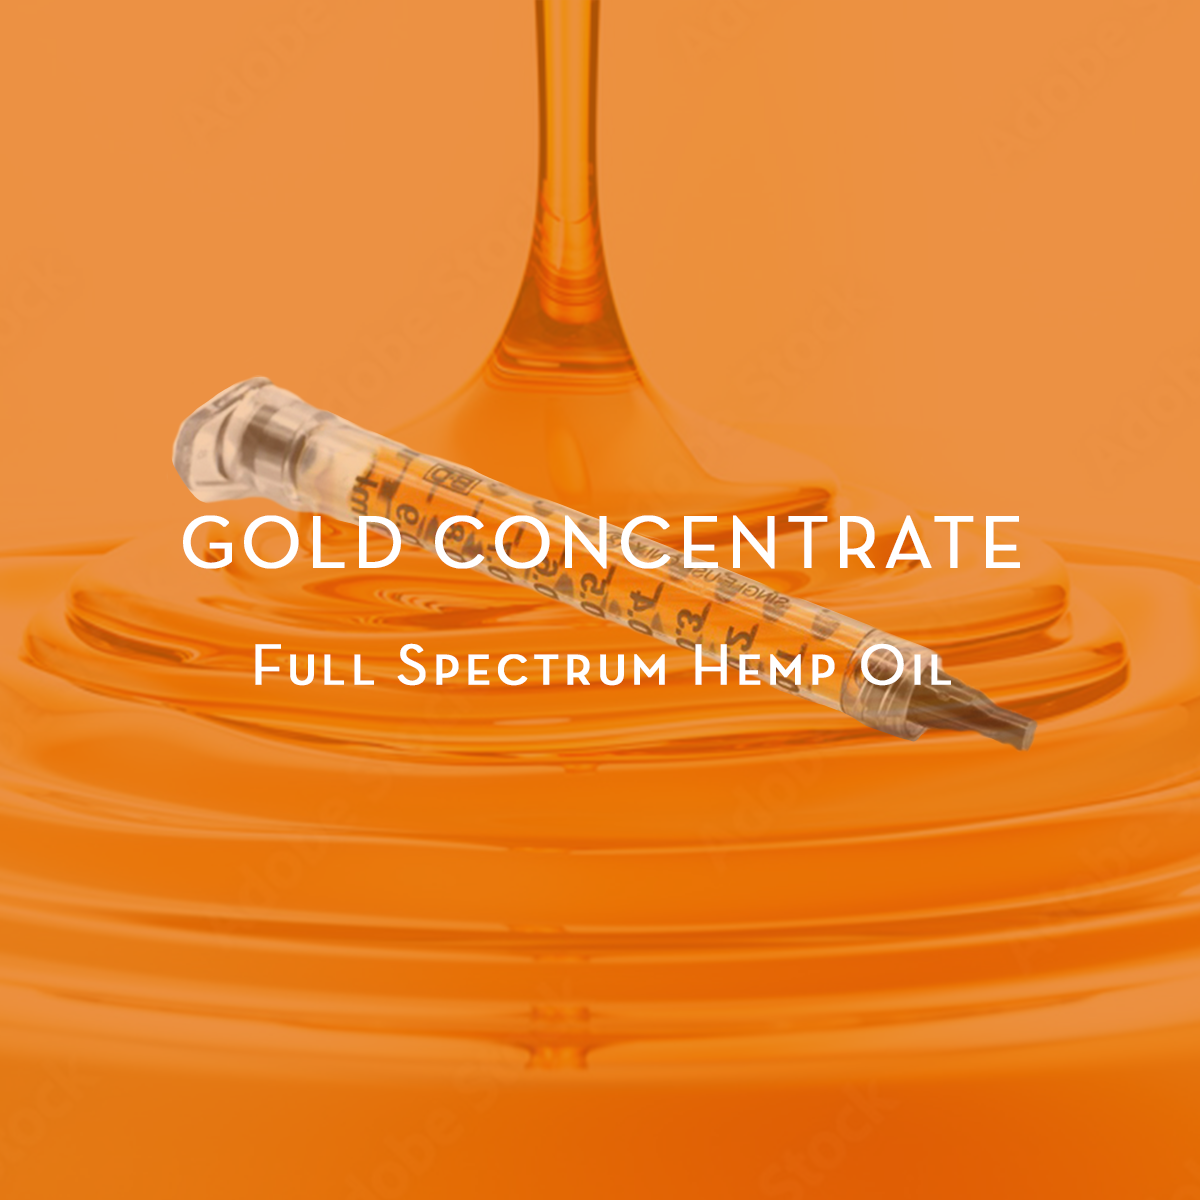 Cannimal Gold Concentrate Full Spectrum Hemp Oil in a syringe with a golden background.